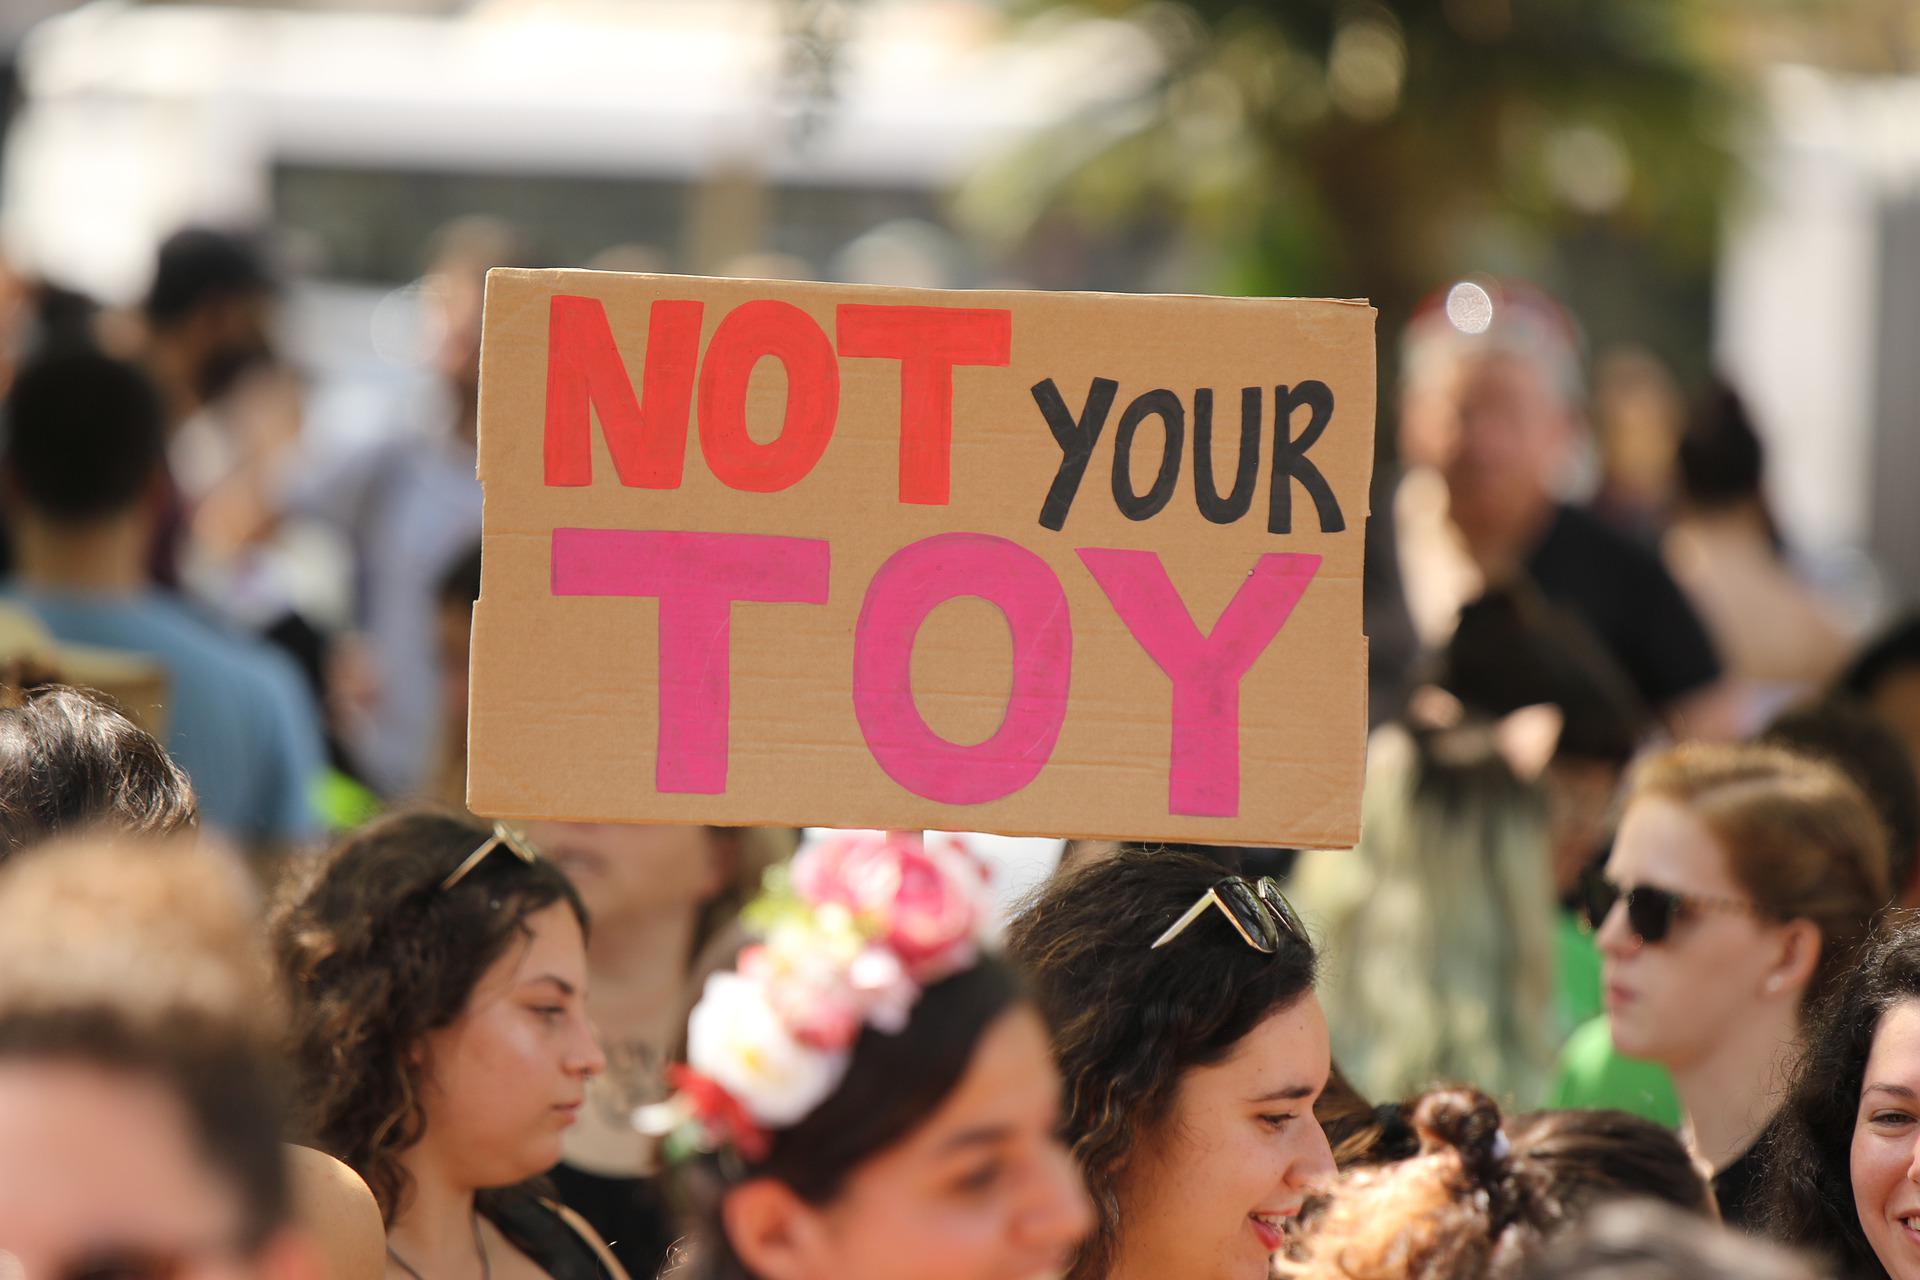 protest sign, "not your toy"